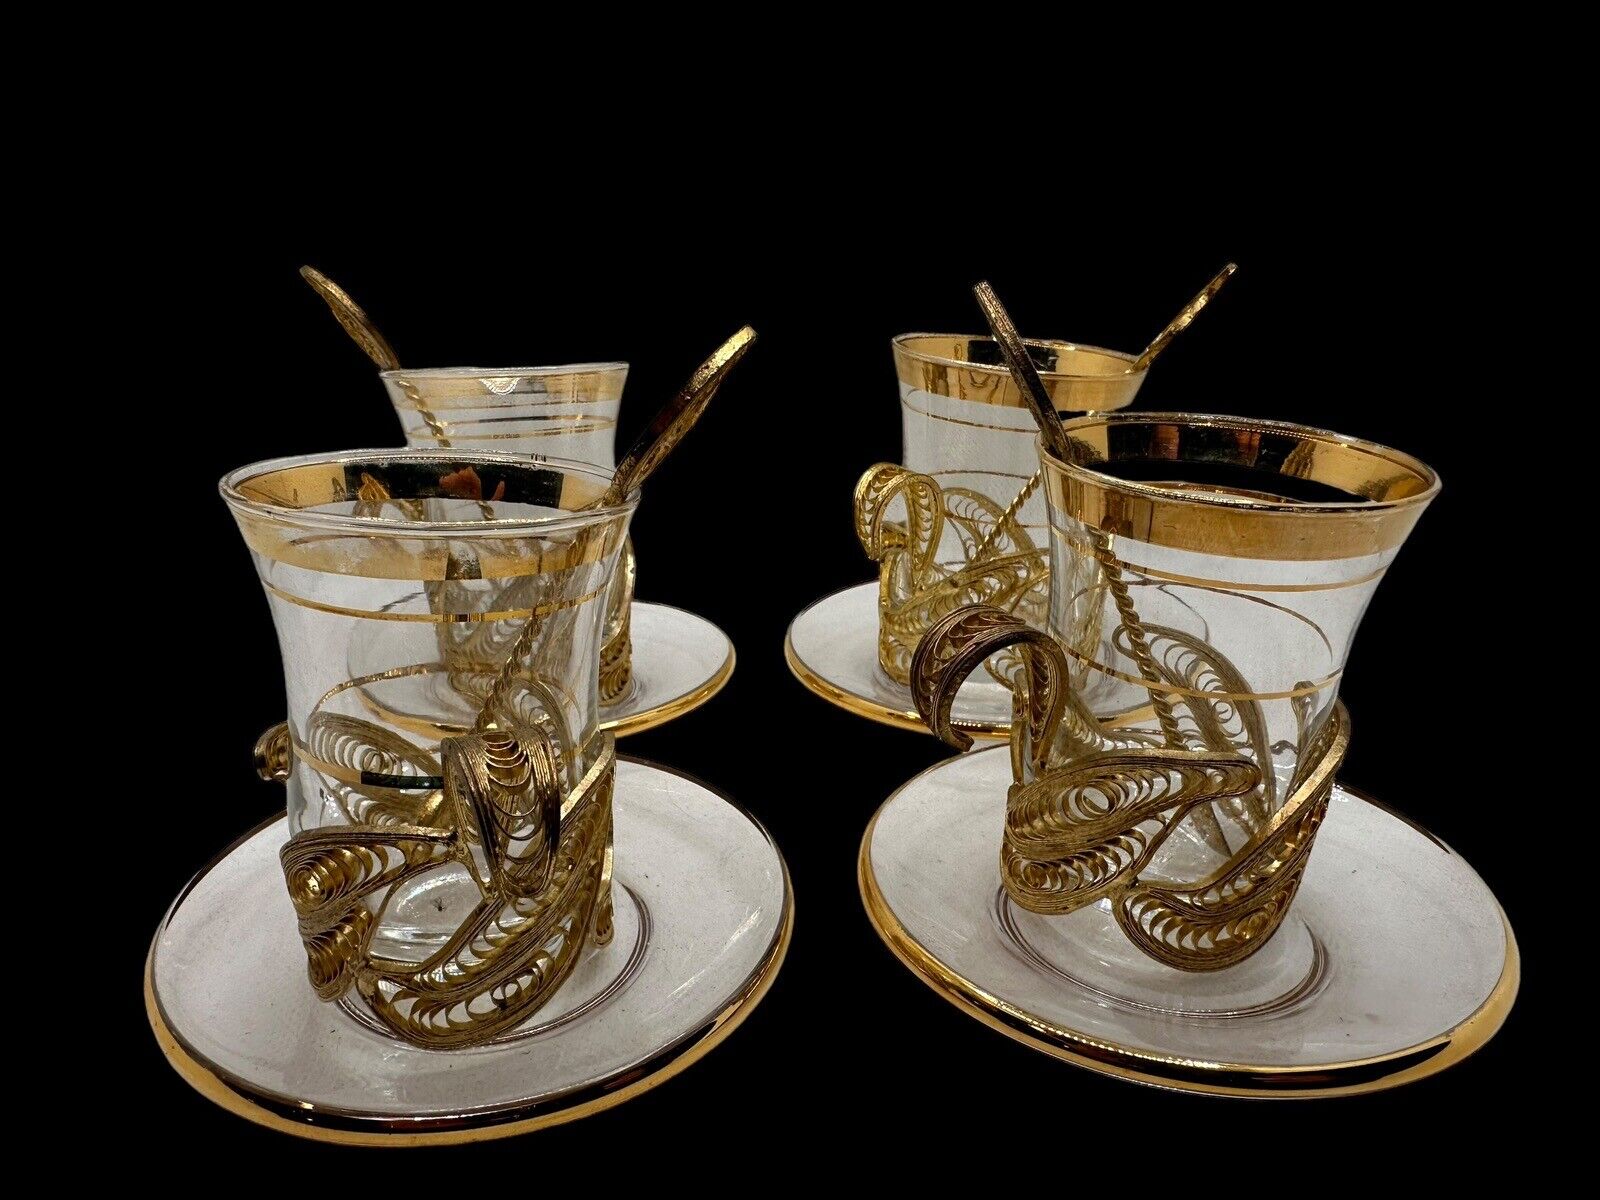 set of 4 gold tone Turkish Demitasse cups with saucers and spoons 